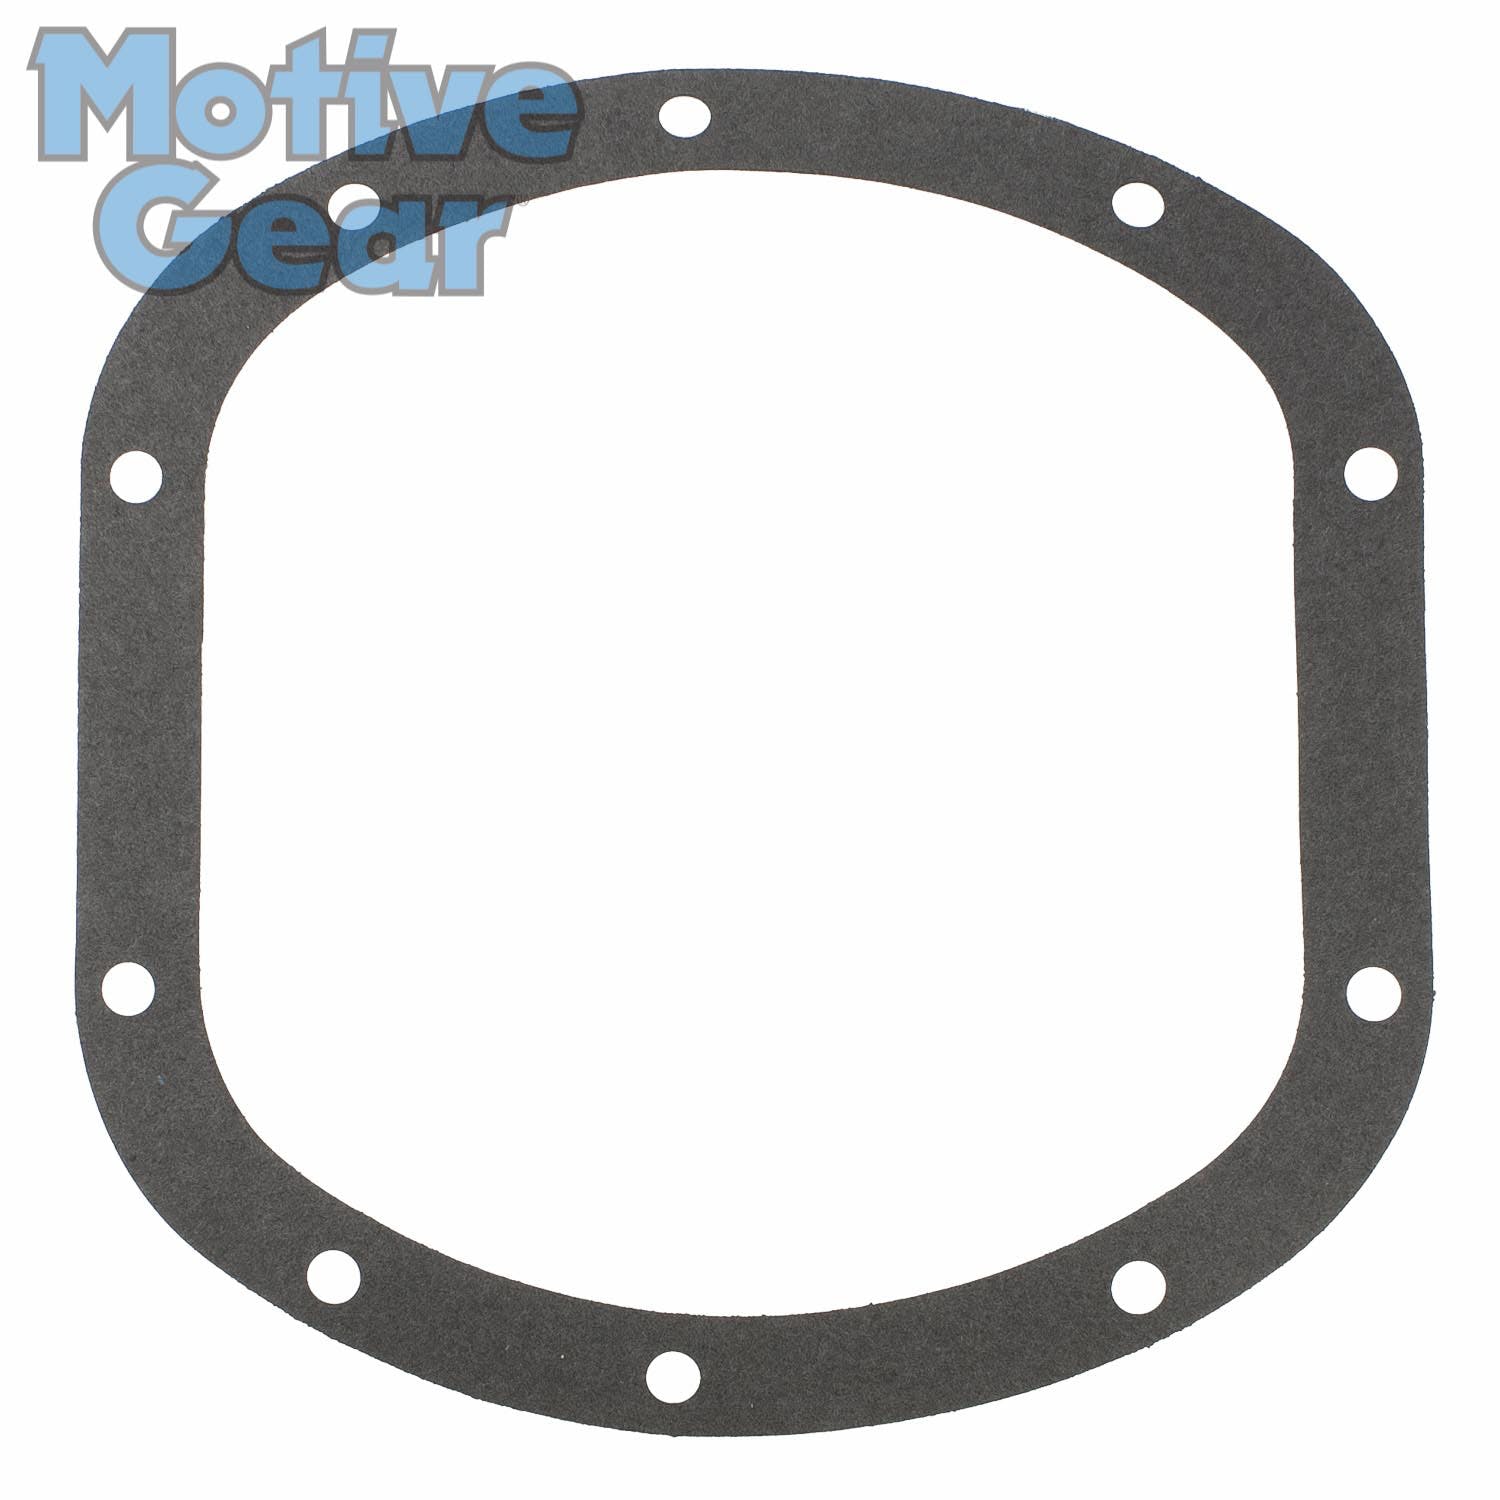 Motive Gear 5113 GASKET Differential Cover Gasket